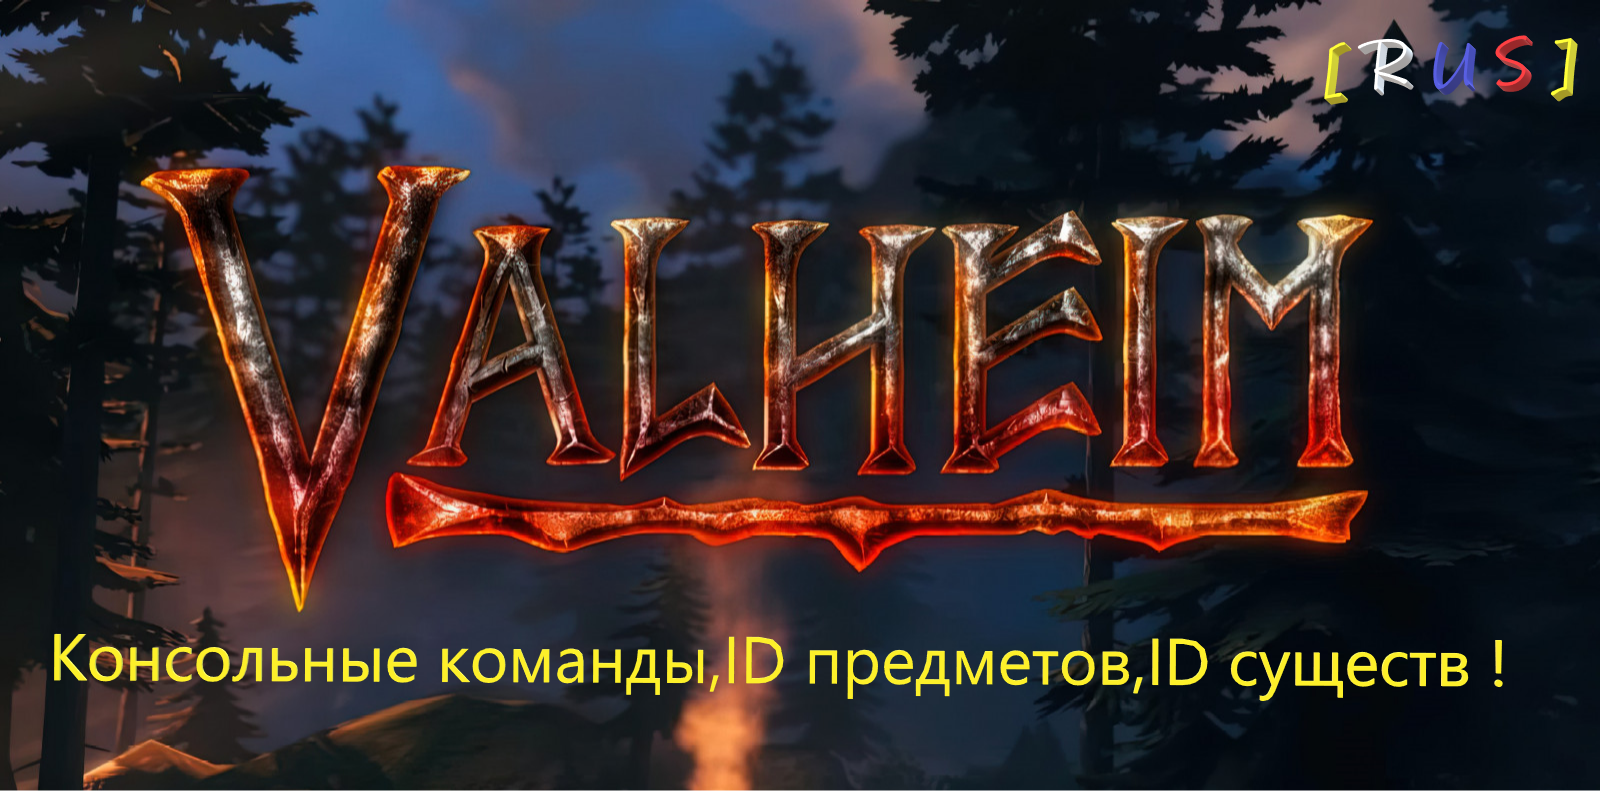 Valheim - All console commands and All NPC - Iteams - Skills ID! - Russian version of the guide/Русская версия руководства :